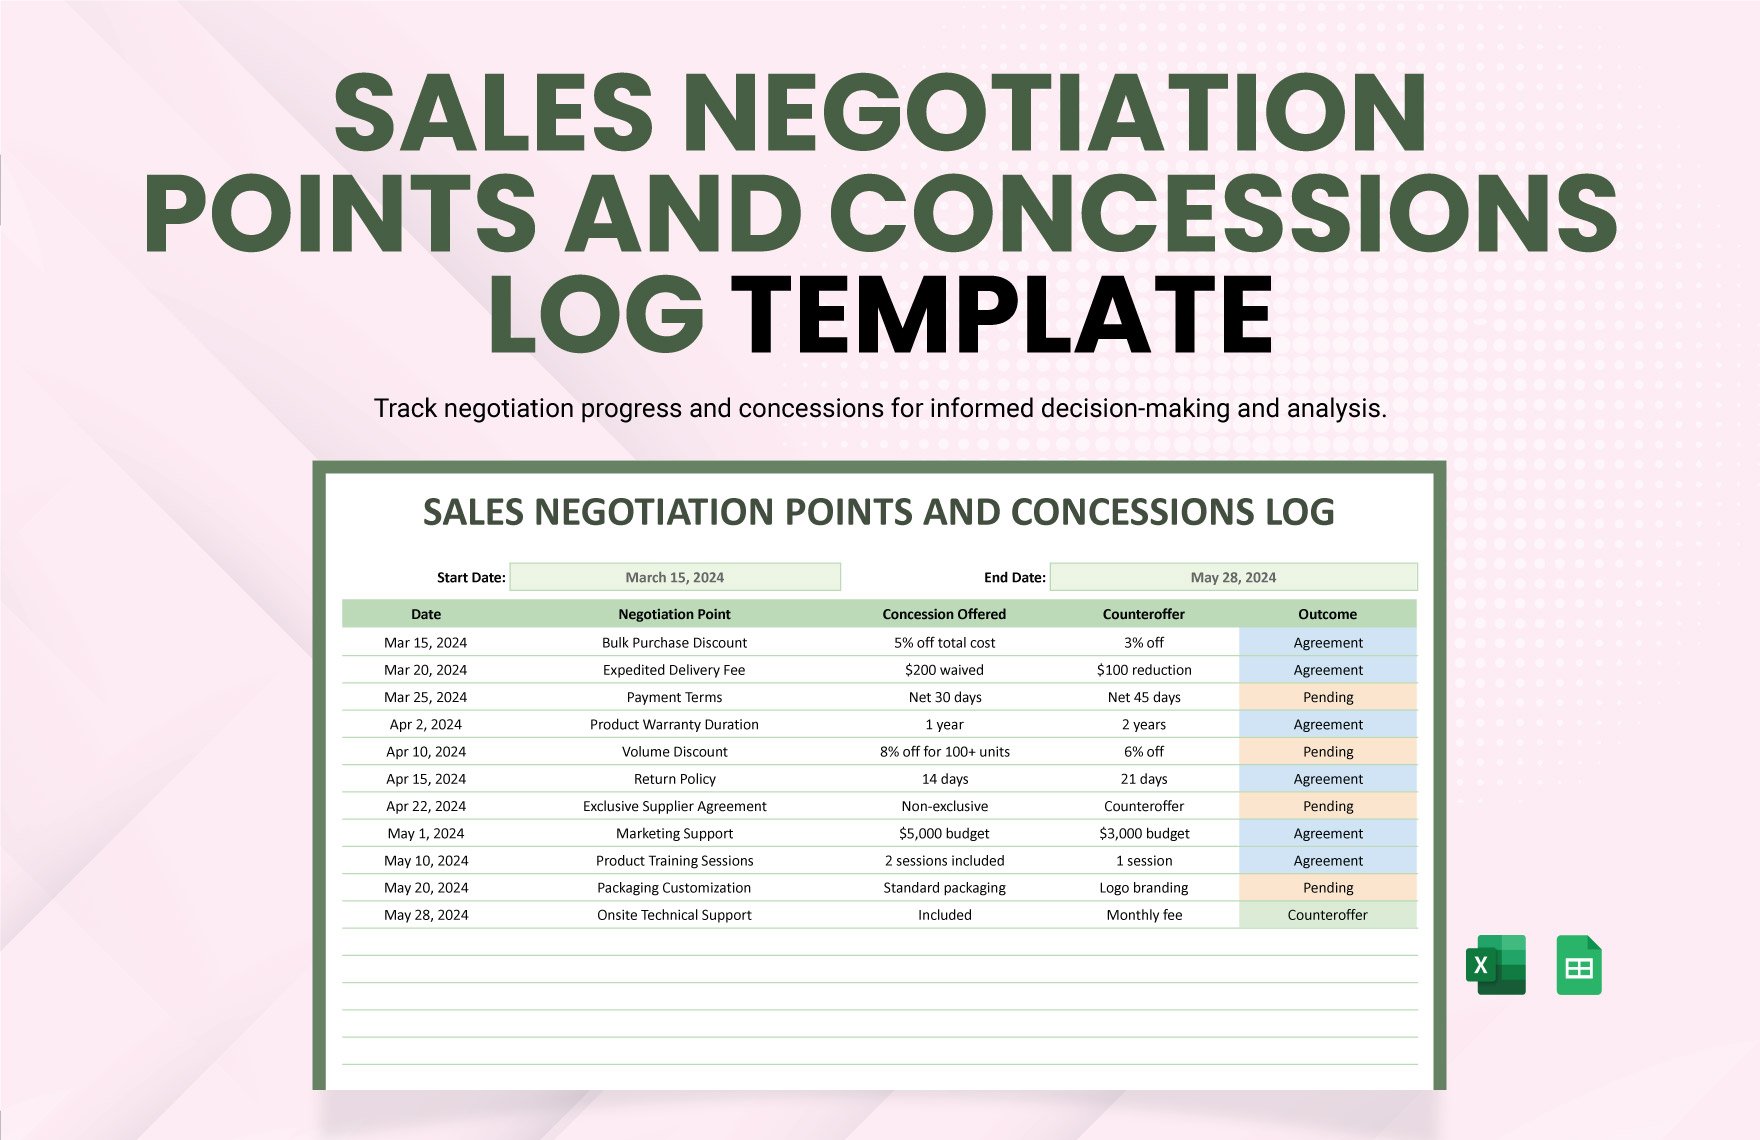 Sales Negotiation Points and Concessions Log Template